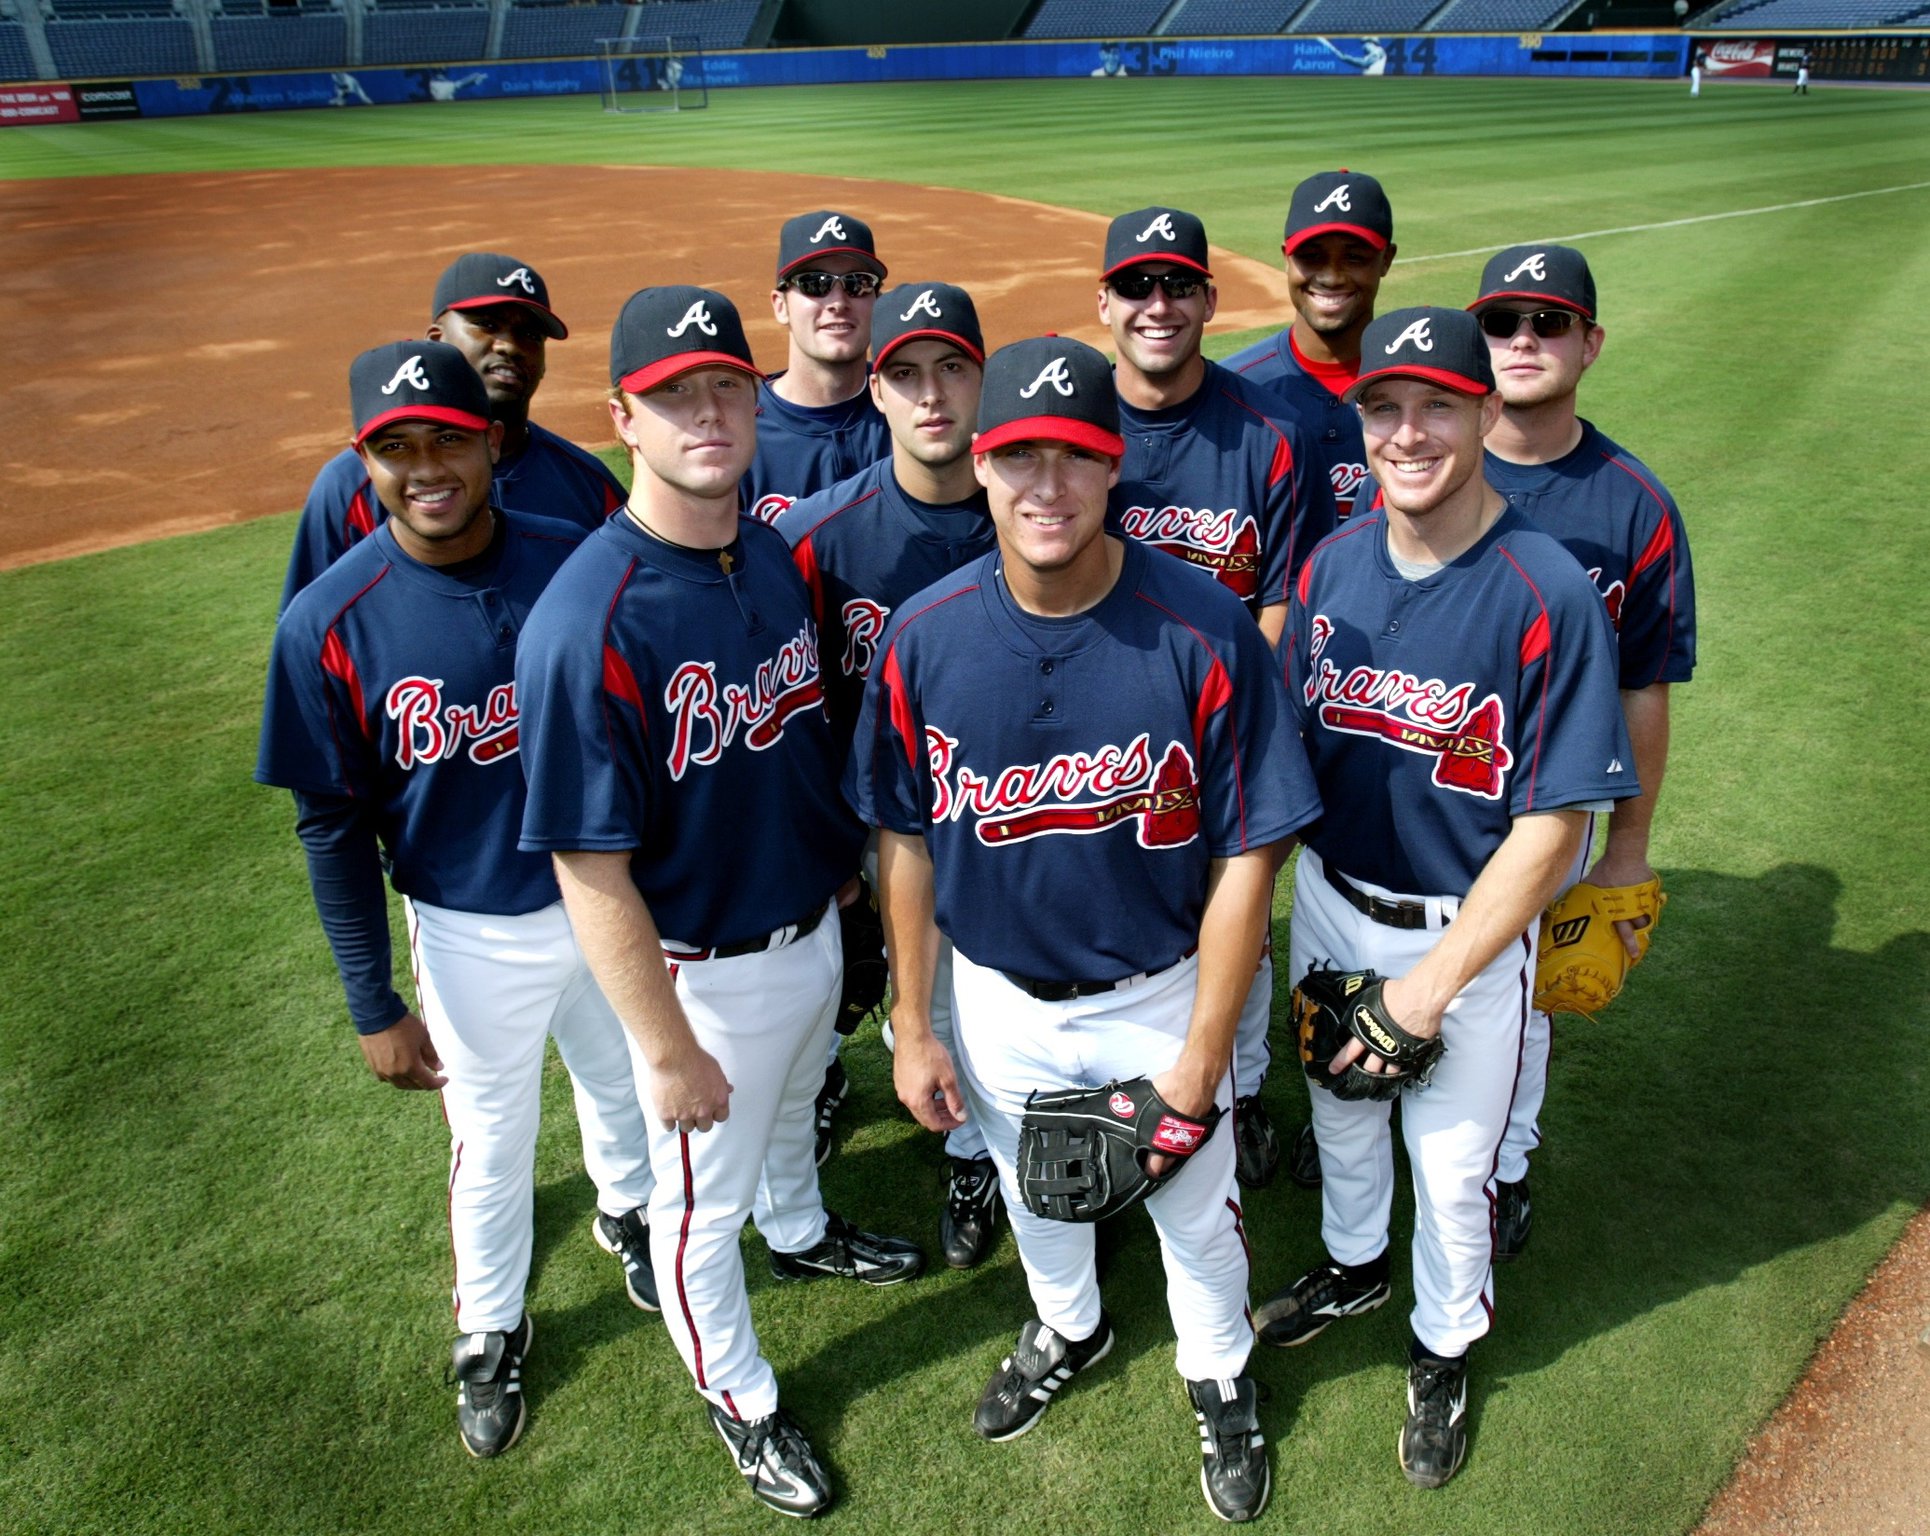 Catching up with the Baby Braves of the 2005 Atlanta Braves team